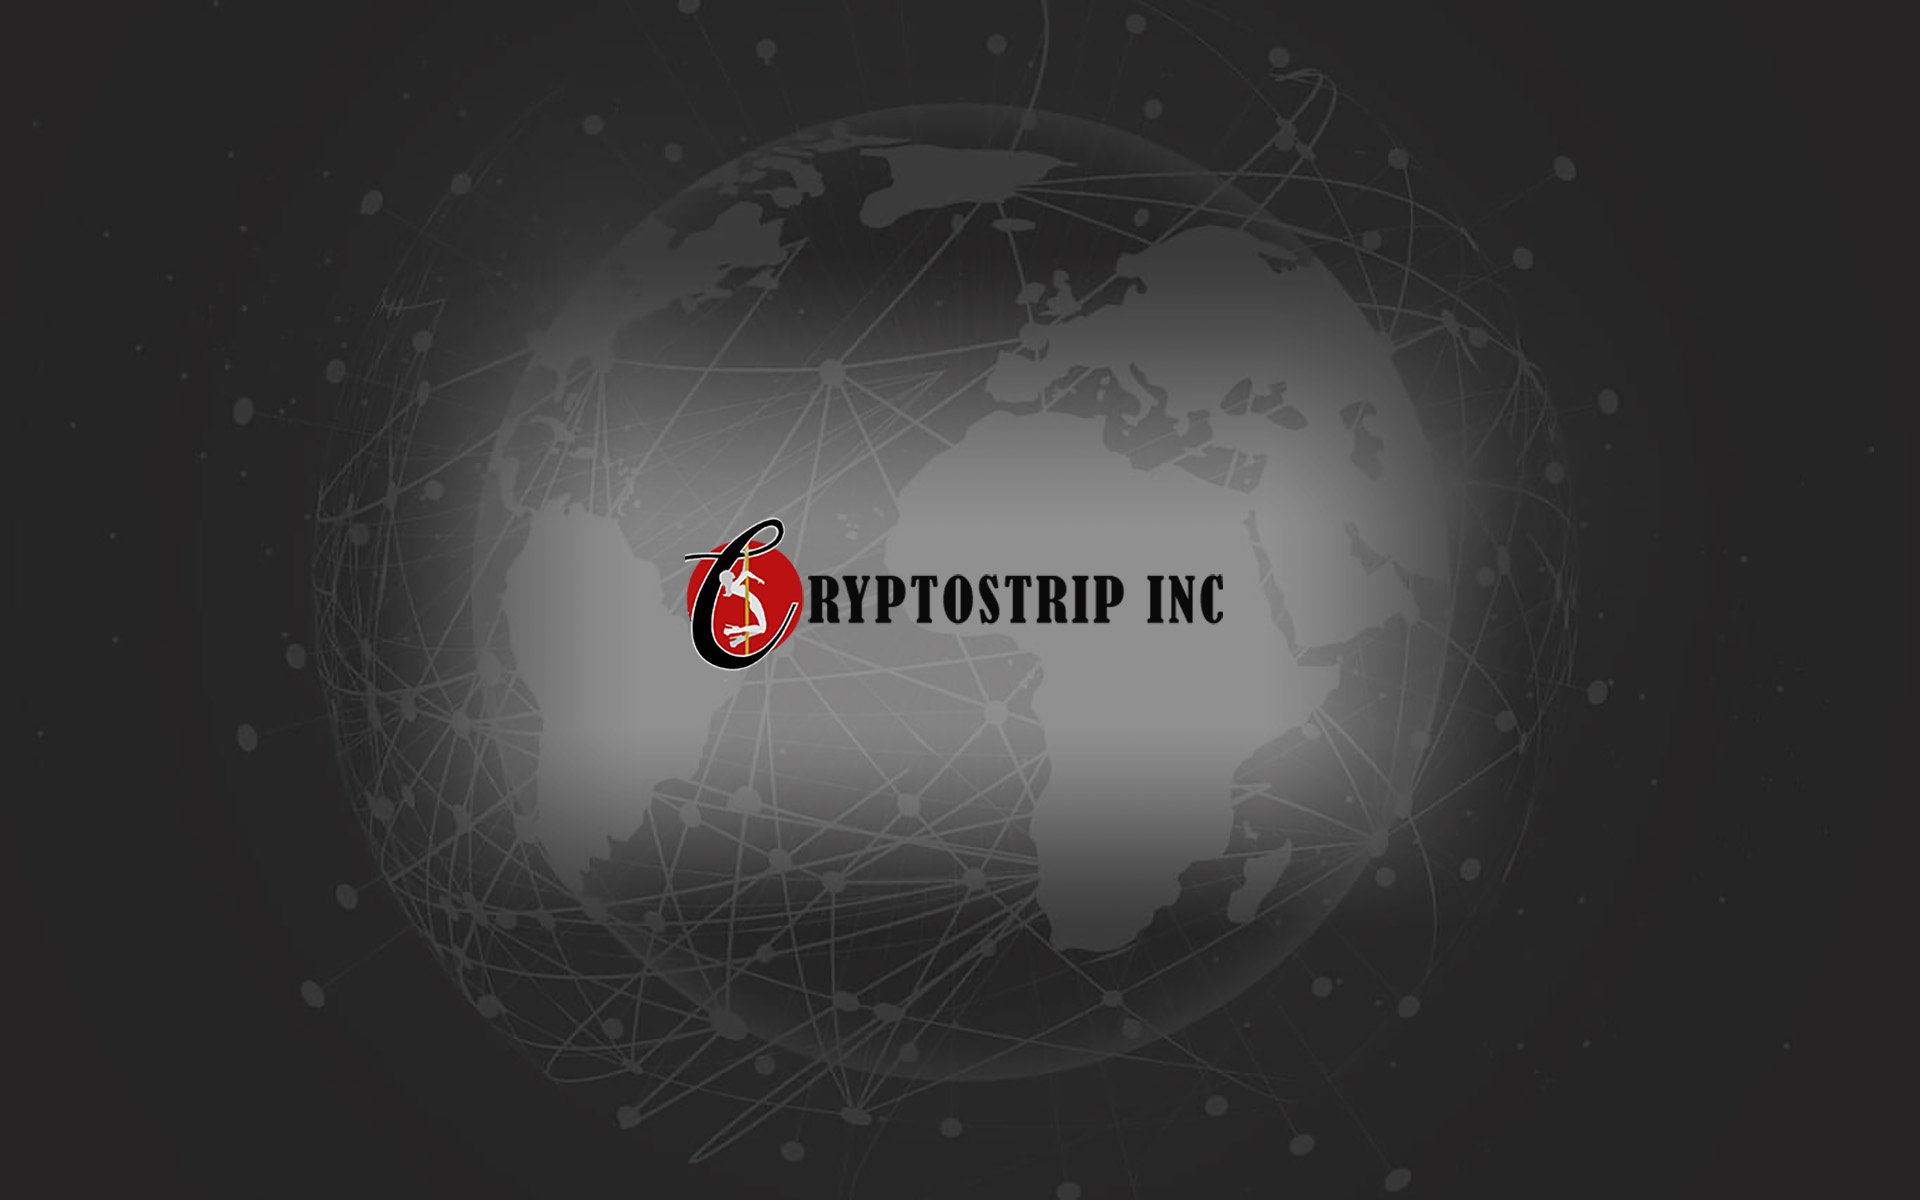 CryptoStrip, Inc. Intends to Dominate Crypto Markets With World’s First Universal Crypto Tokens Created For Exotic Dance Clubs